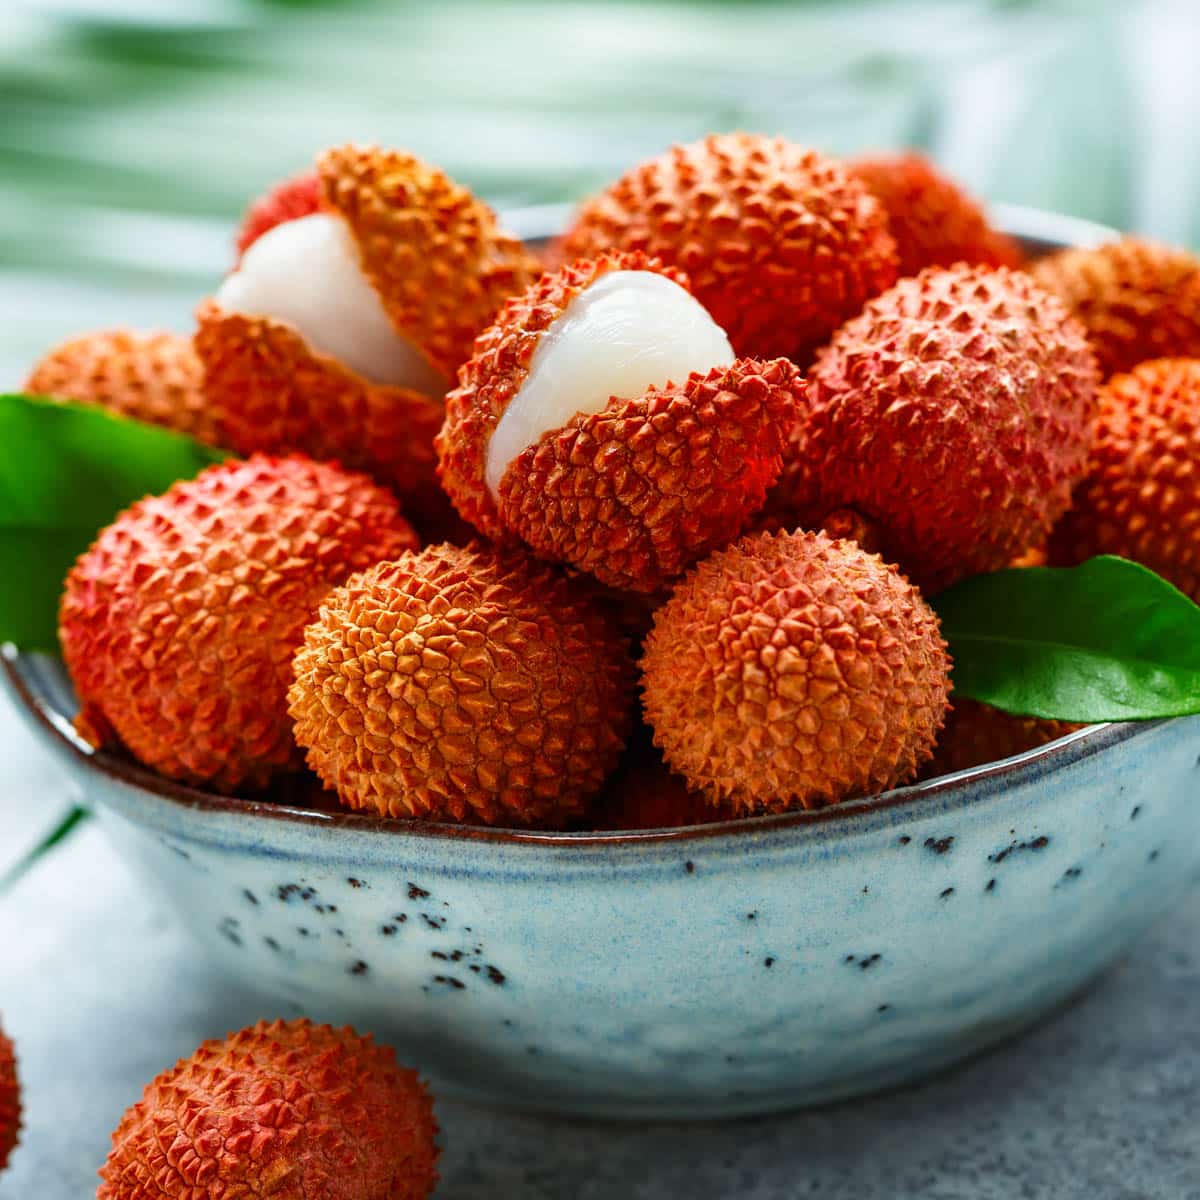 A bowl filled with ripe lychee, some of them cracked in half to show the fruit inside.